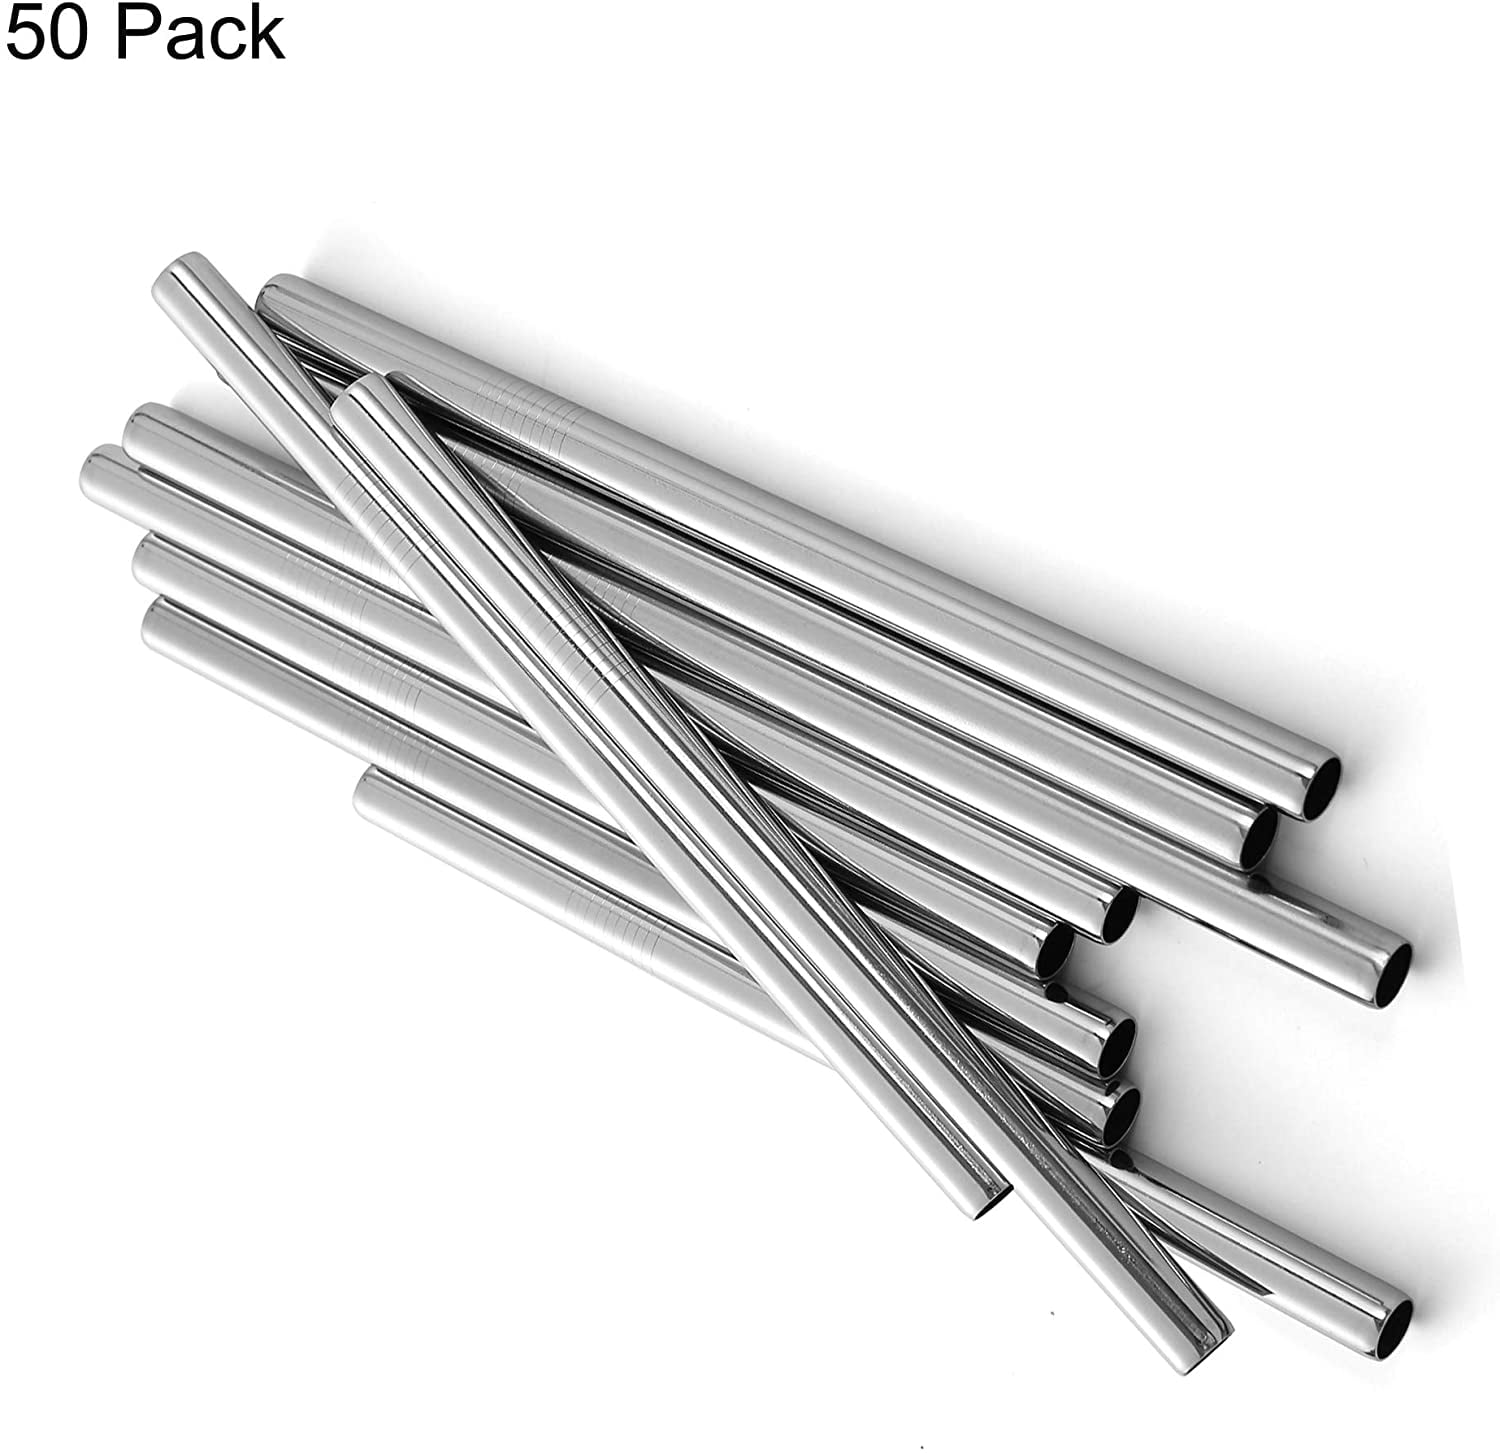 Lot of 50 Extra Wide Stainless Steel Boba Smoothie Straws 